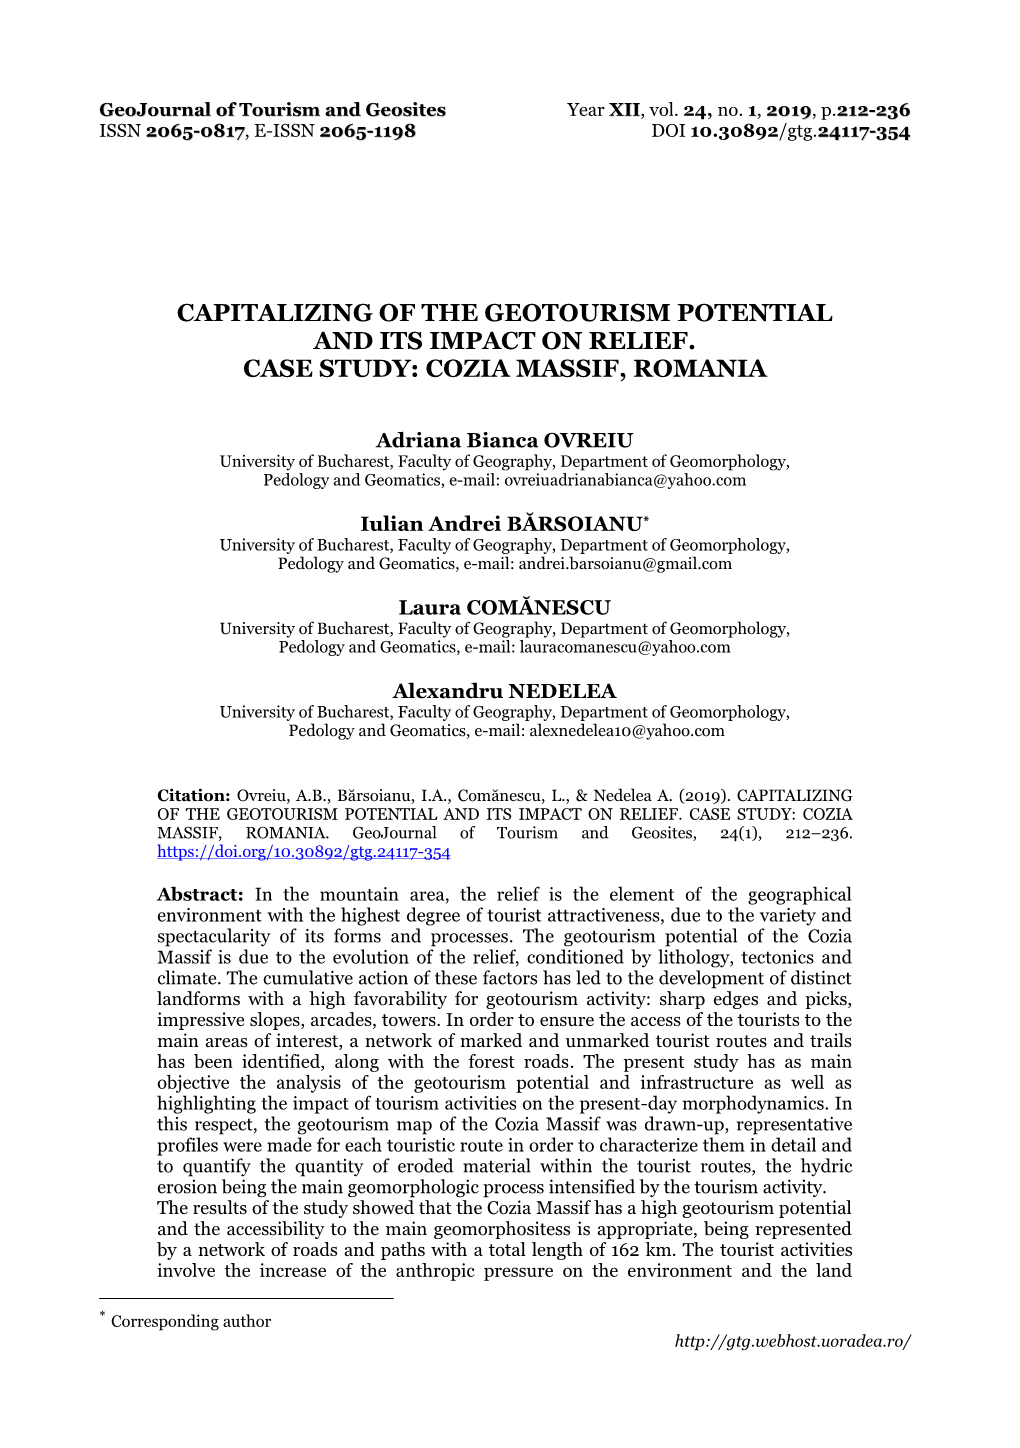 Capitalizing of the Geotourism Potential and Its Impact on Relief. Case Study: Cozia Massif, Romania